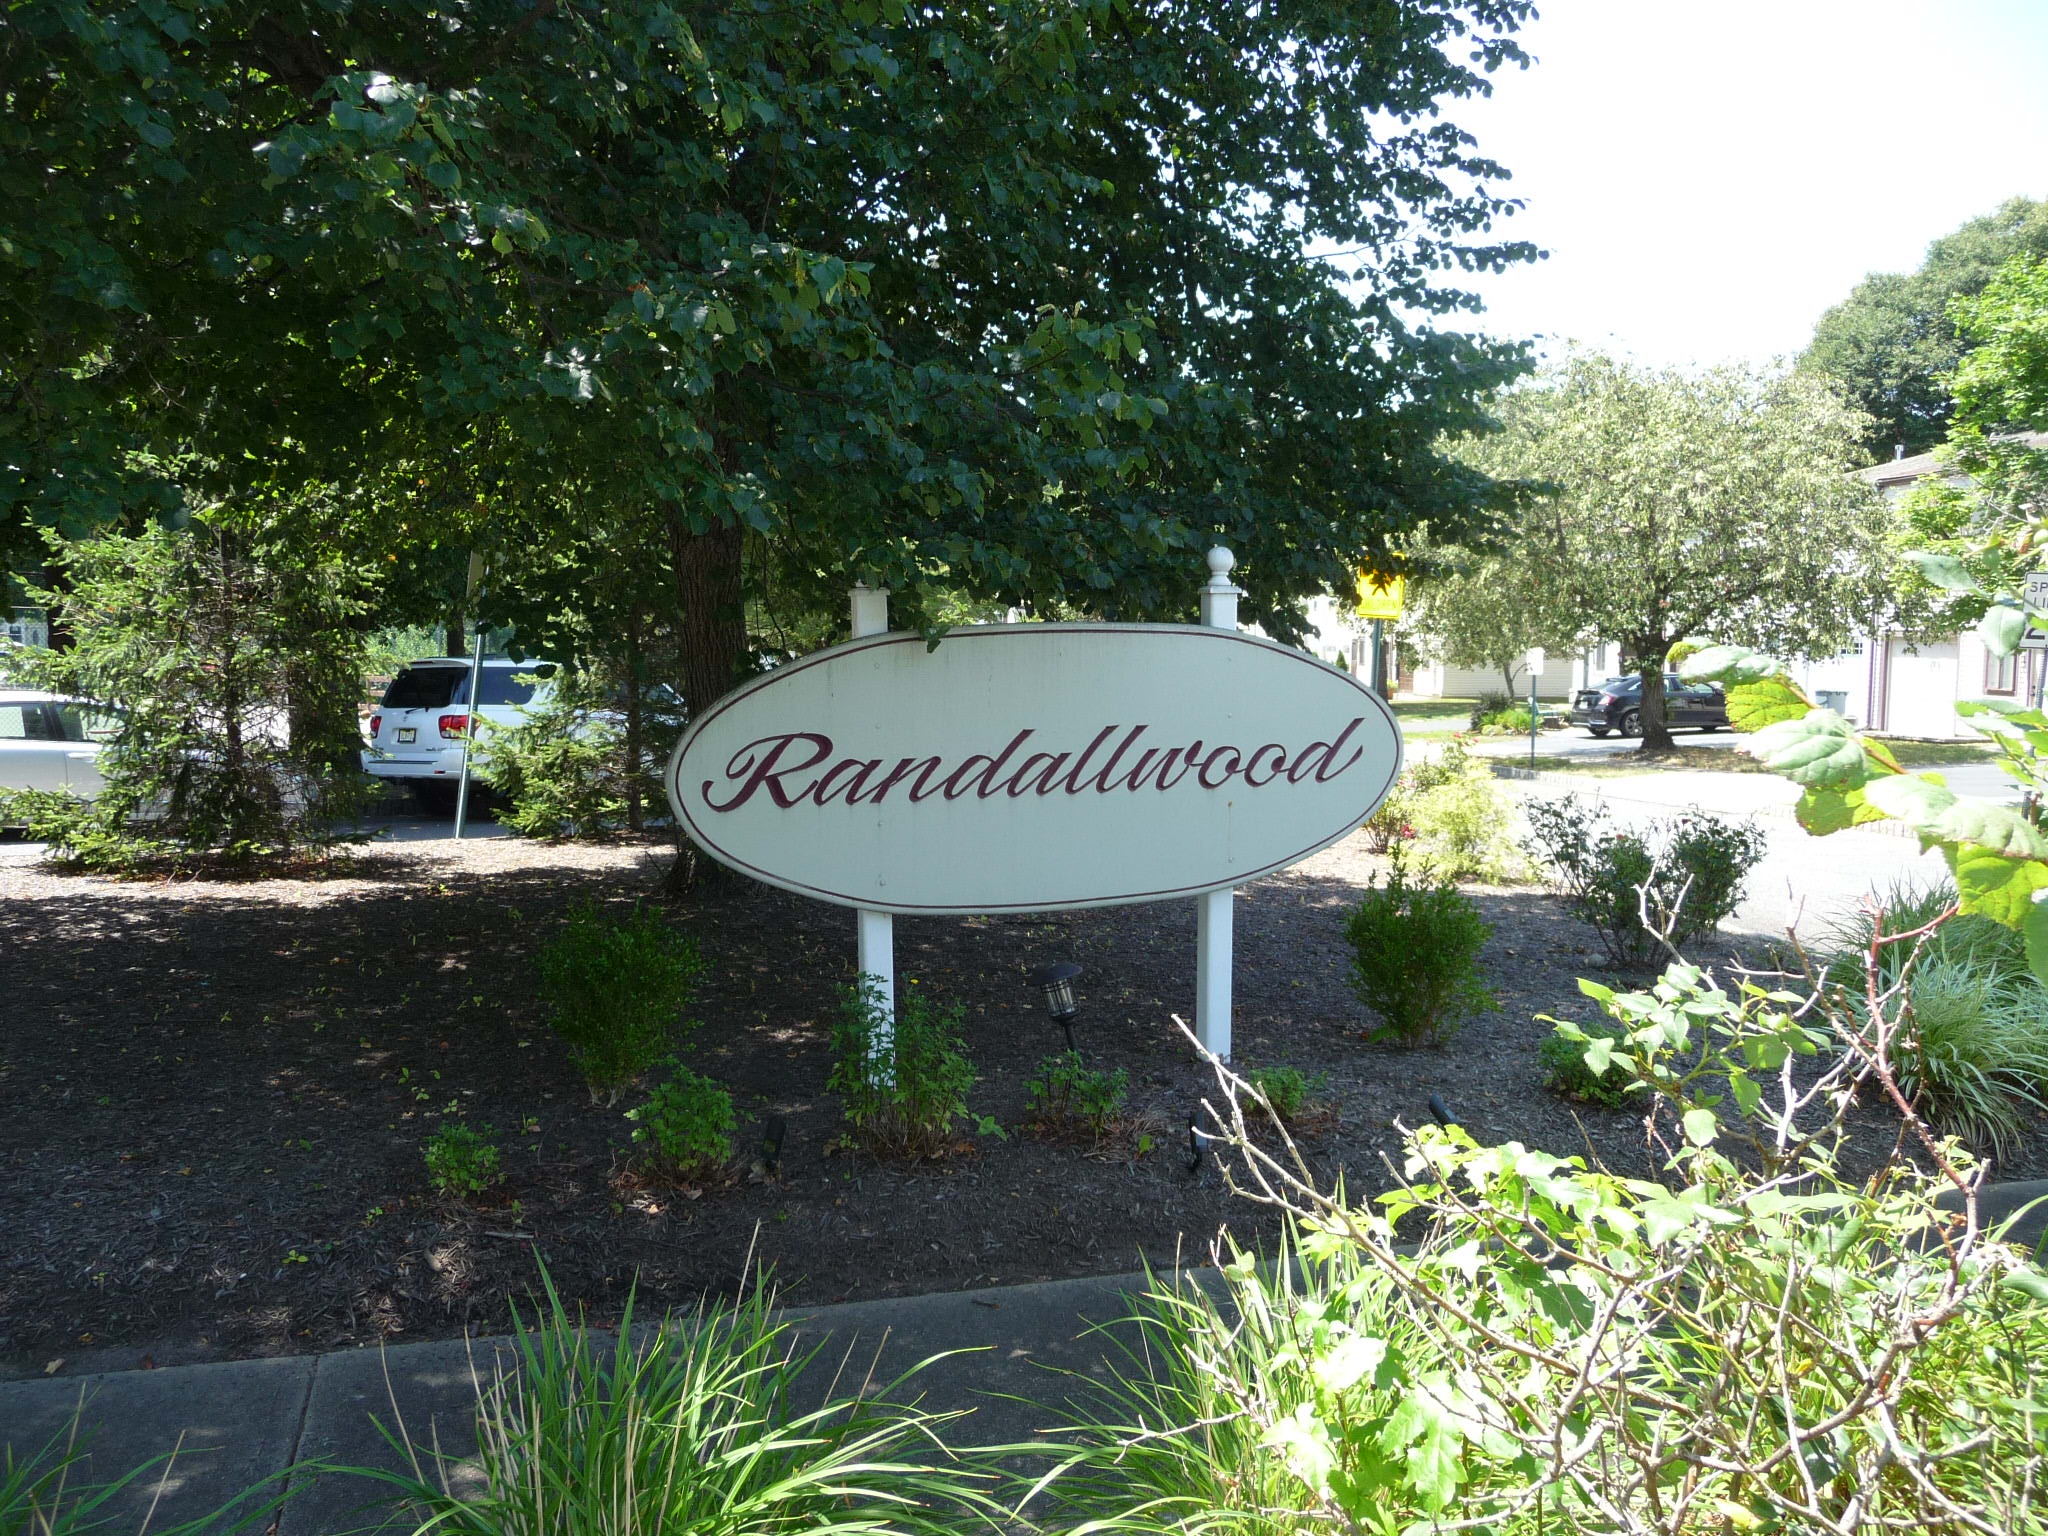 Entry sign to Randallwood Townhouses.